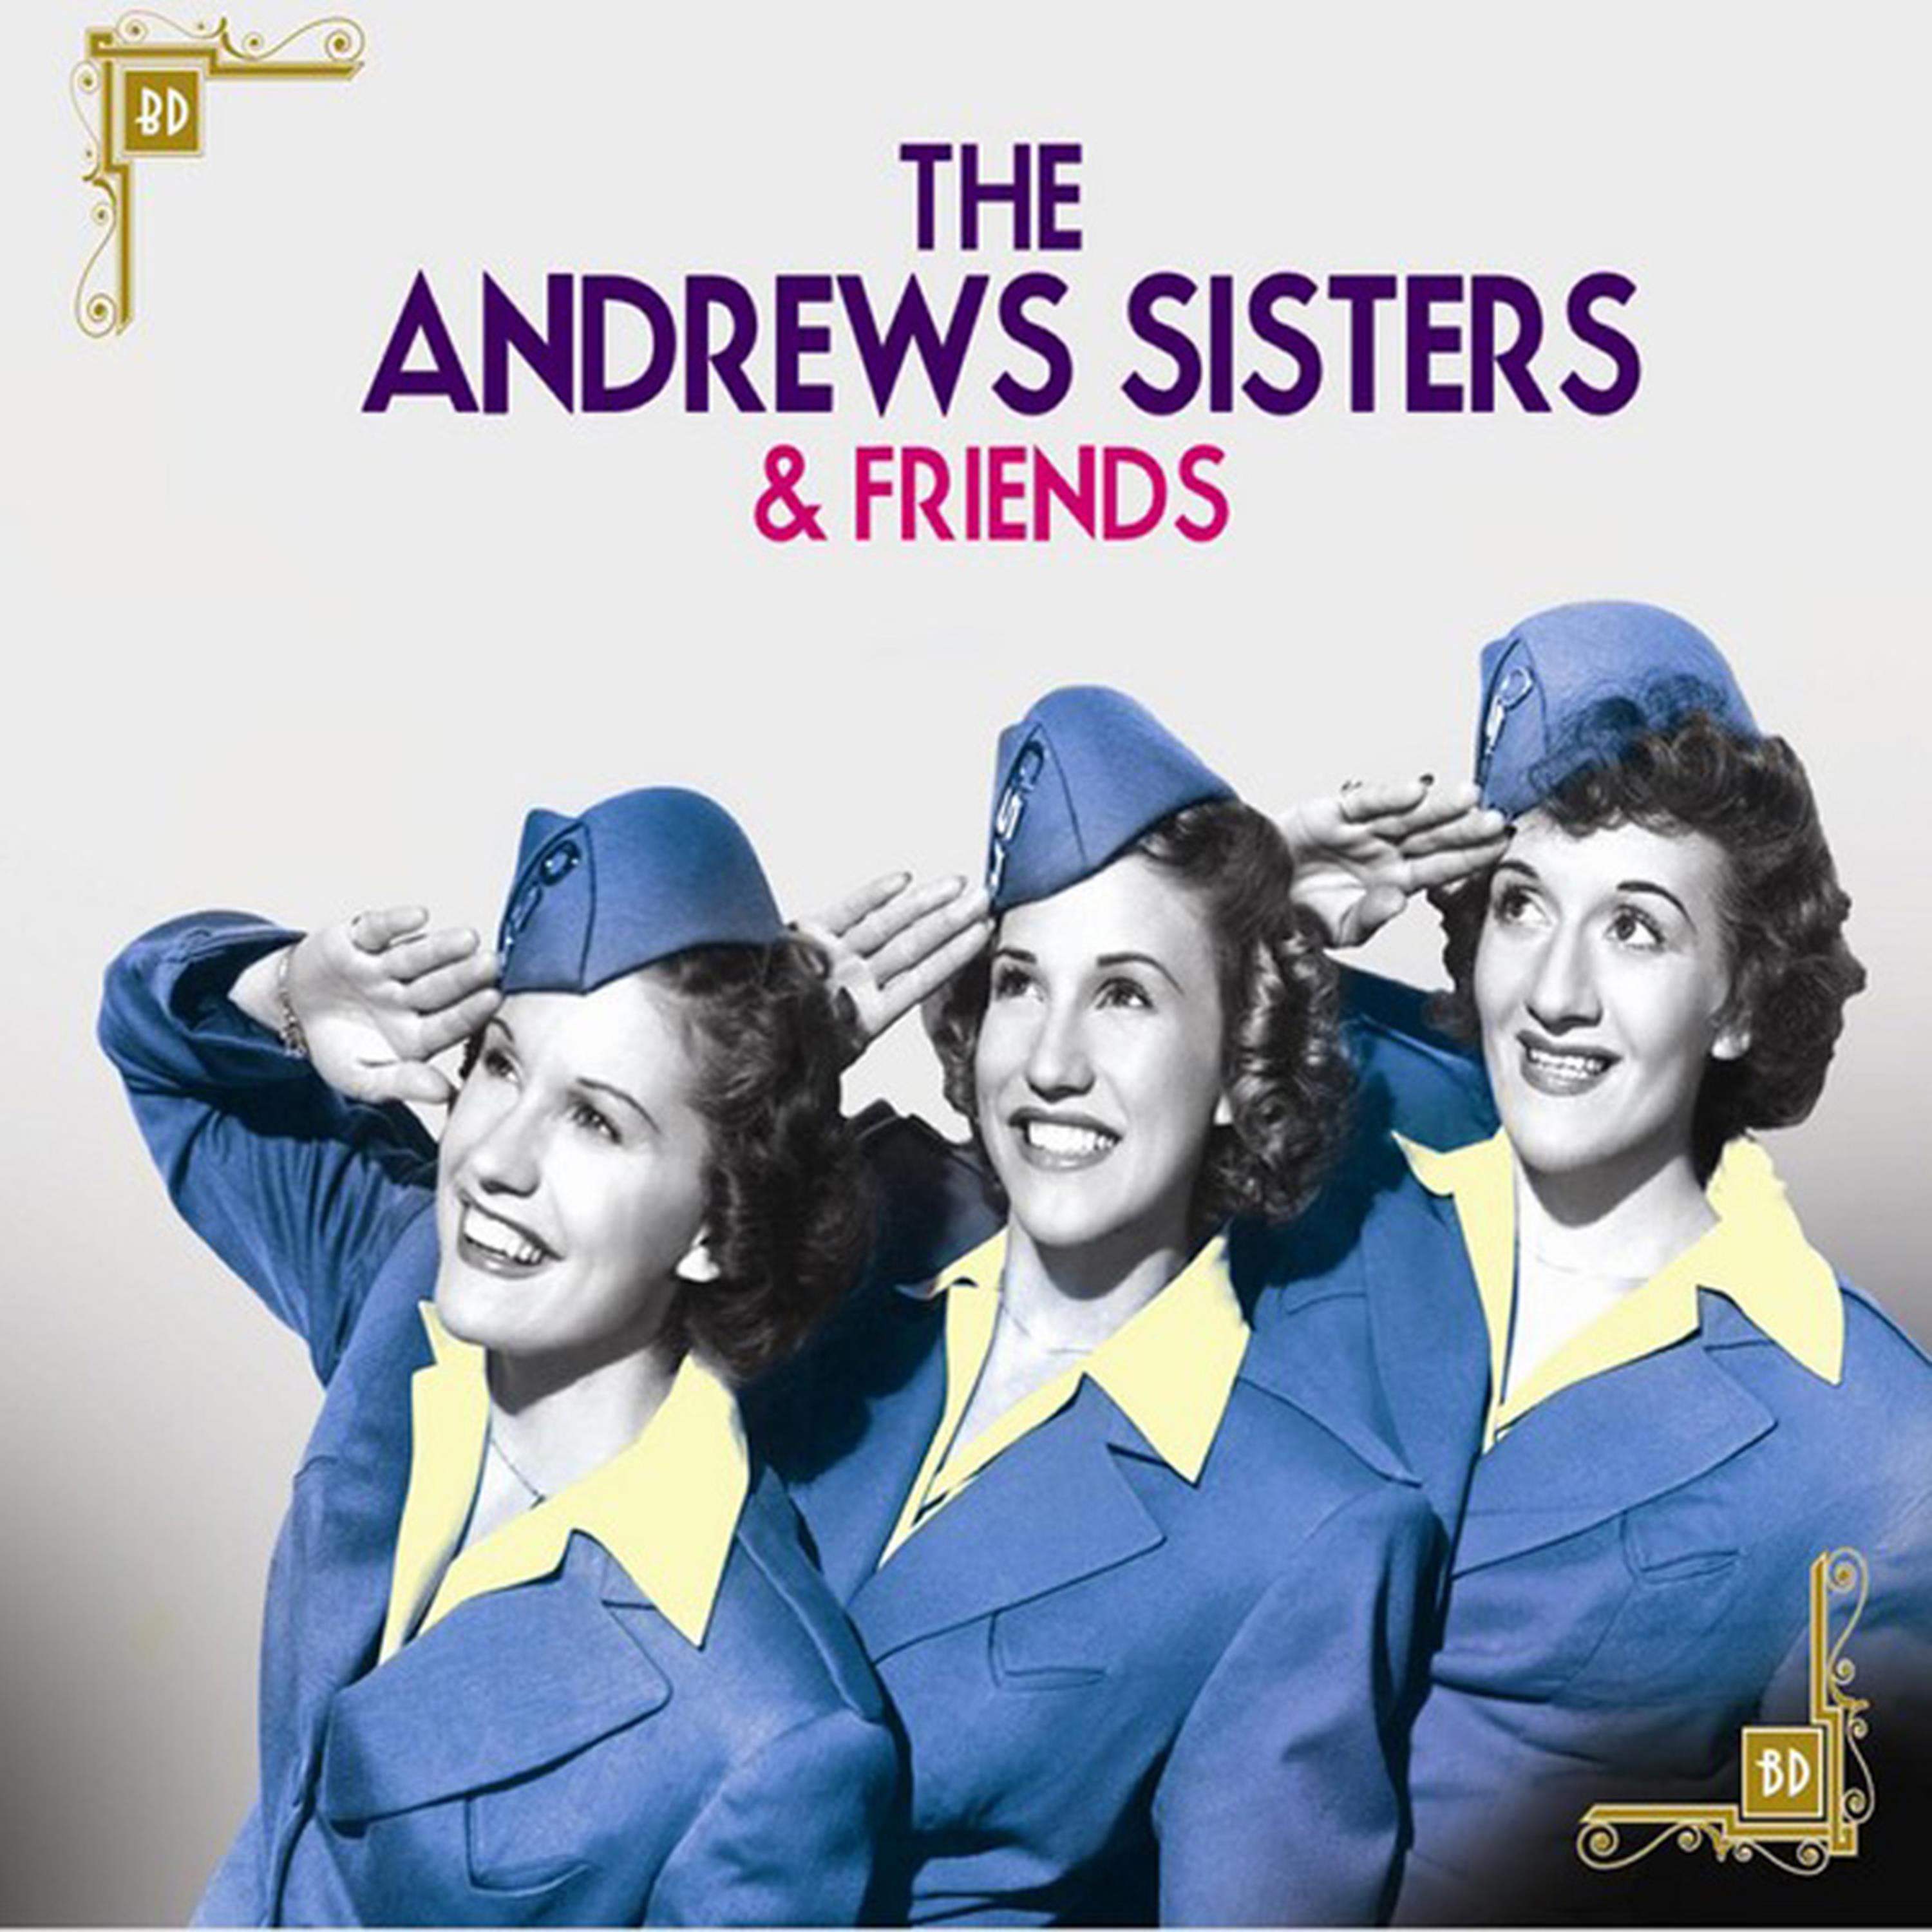 The Andrews Sisters & Friends